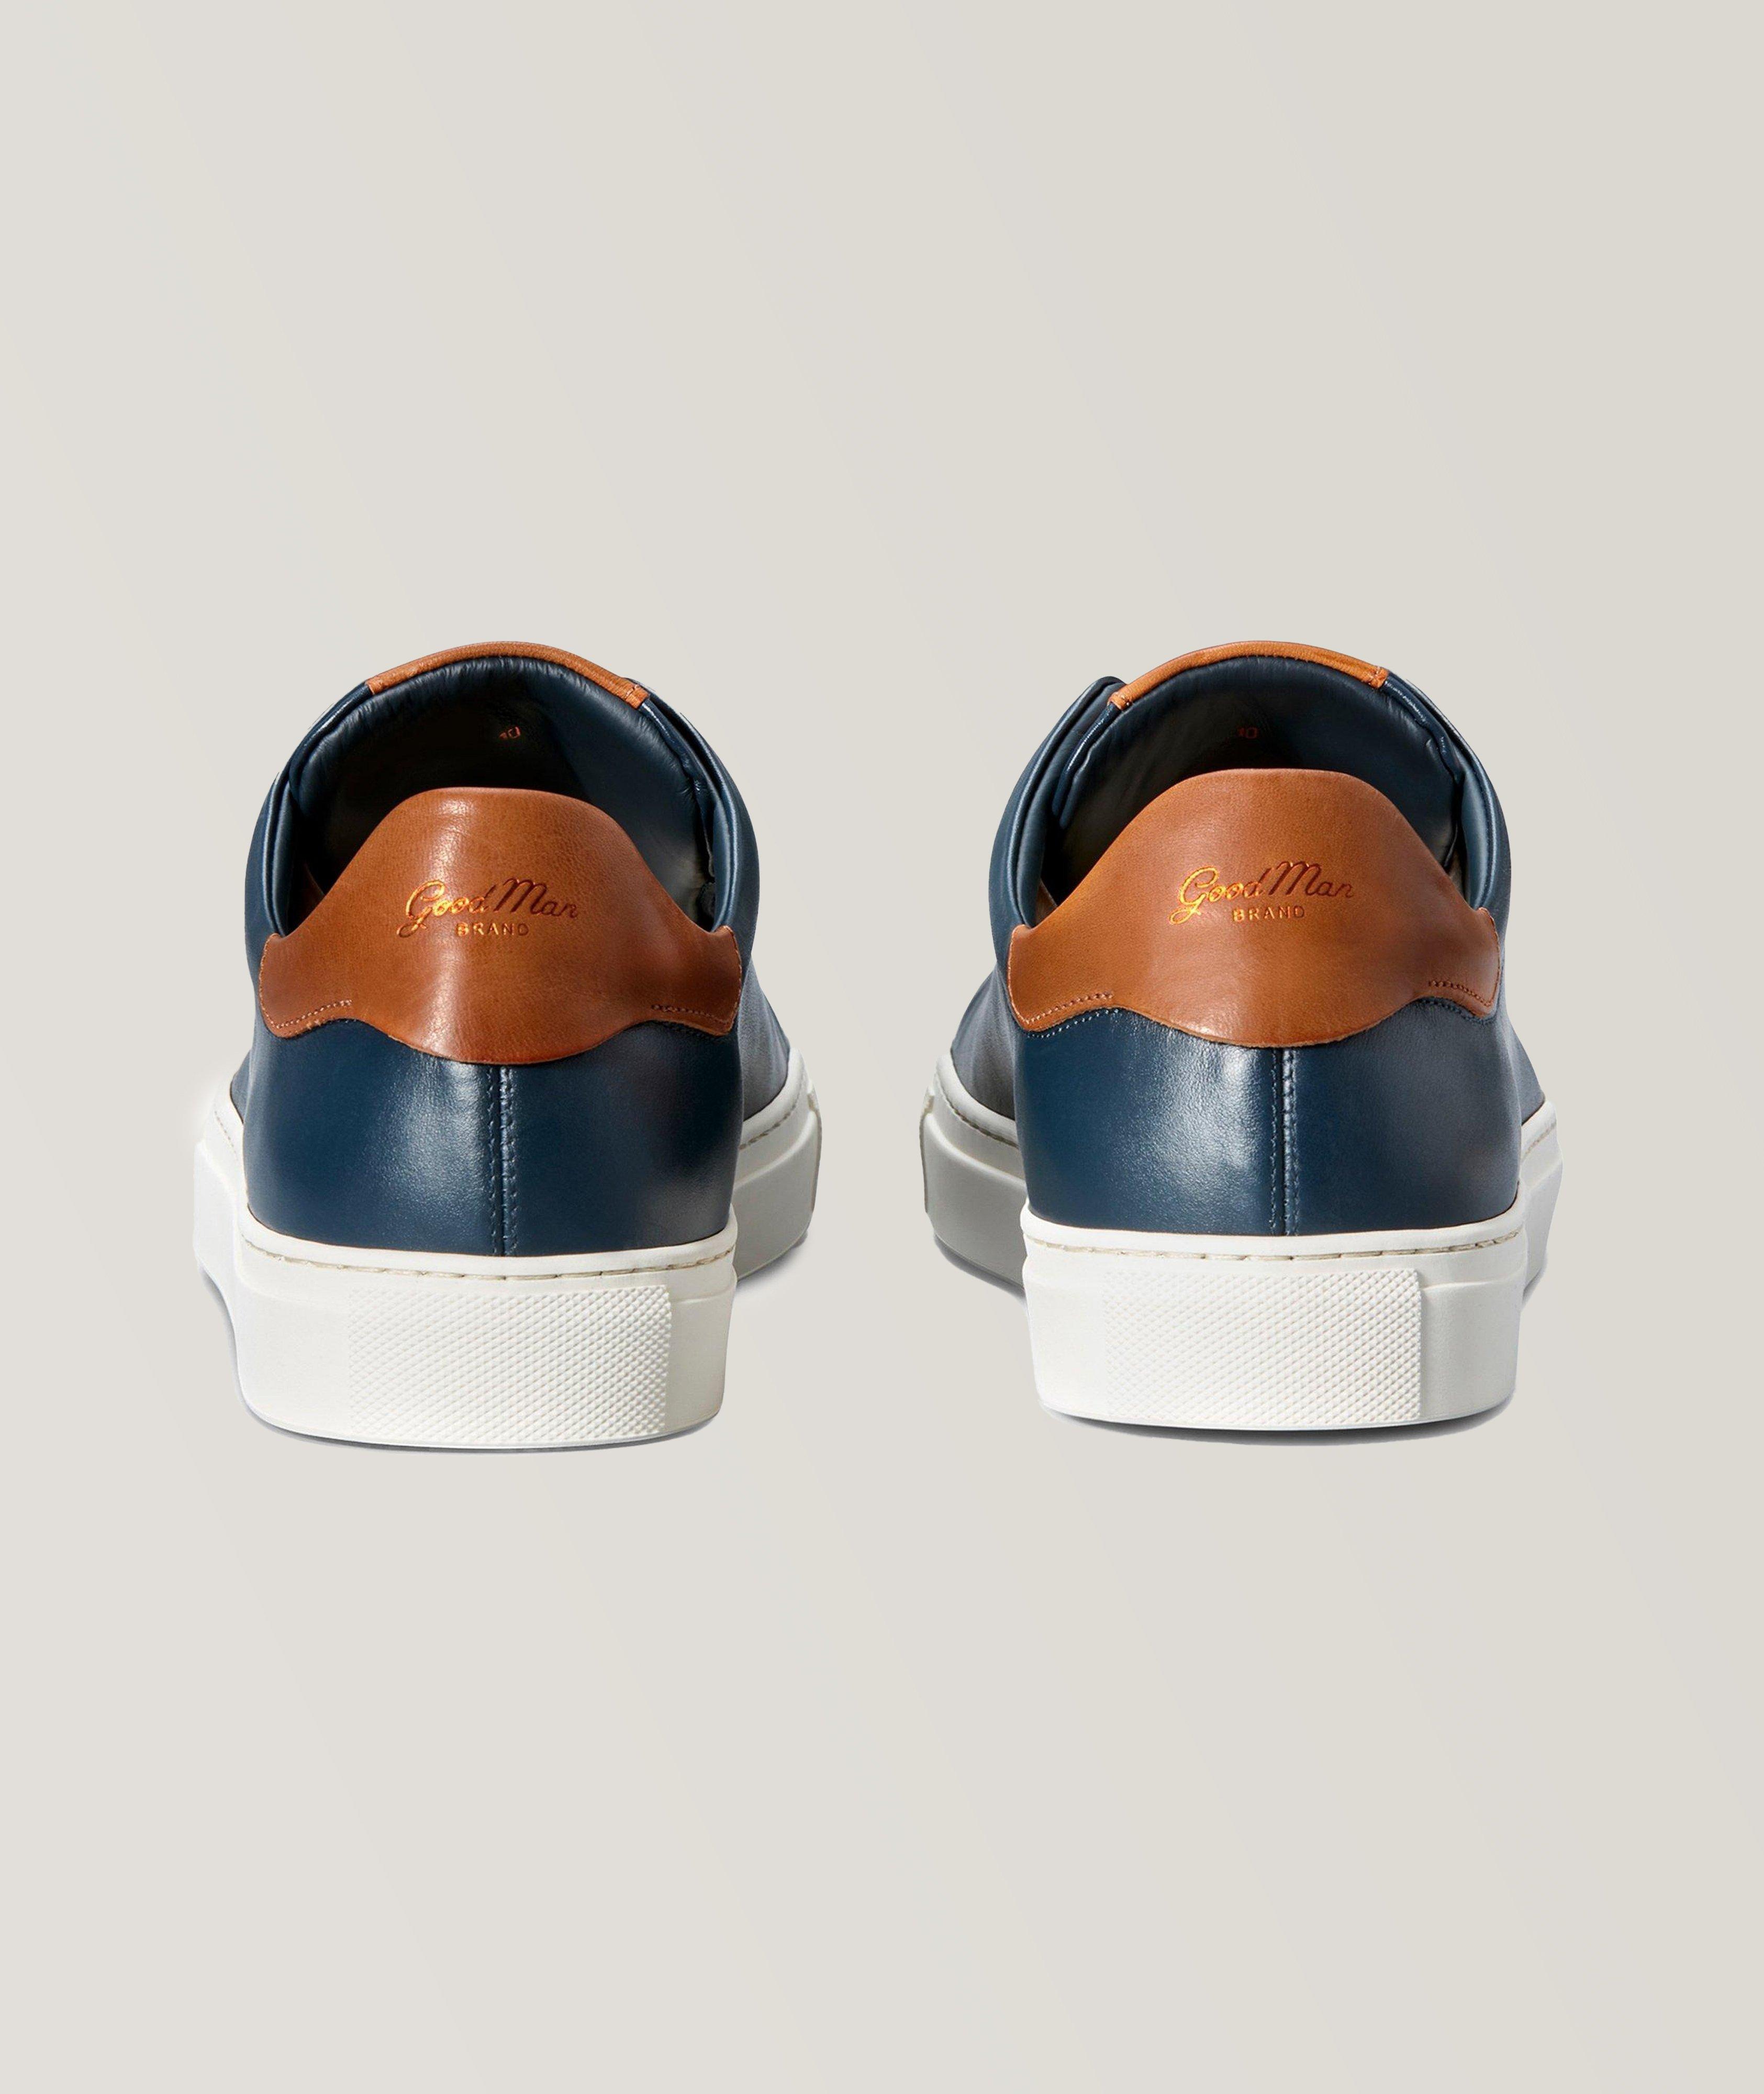 Legend Leather Sneakers image 4